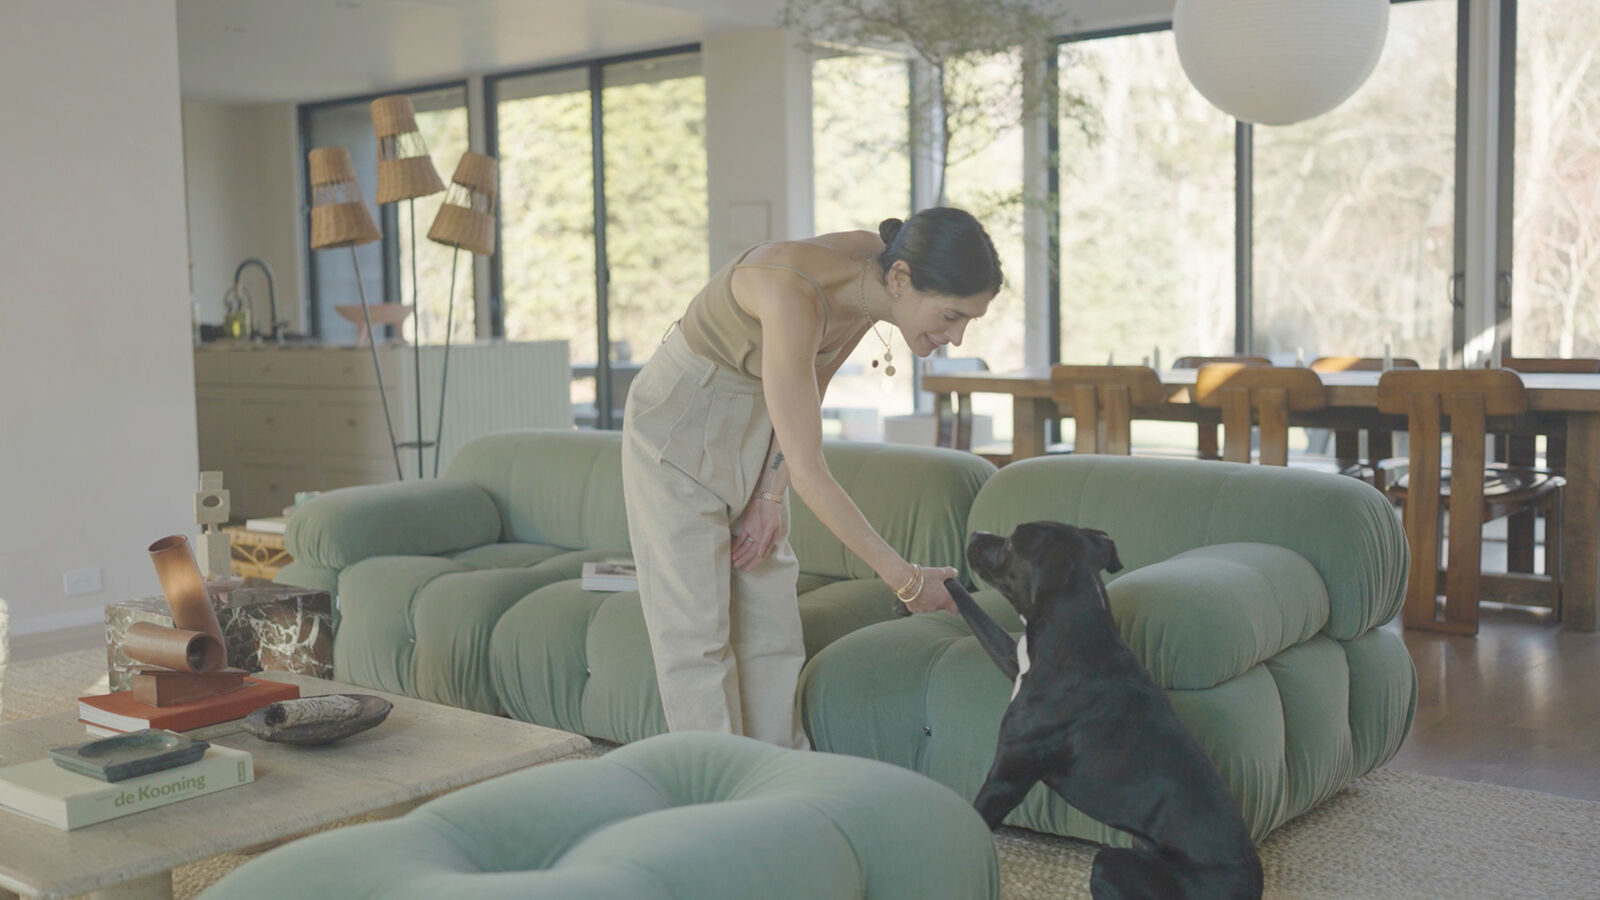 Athena Calderone stroking her dog in a living room with a Camaleonda